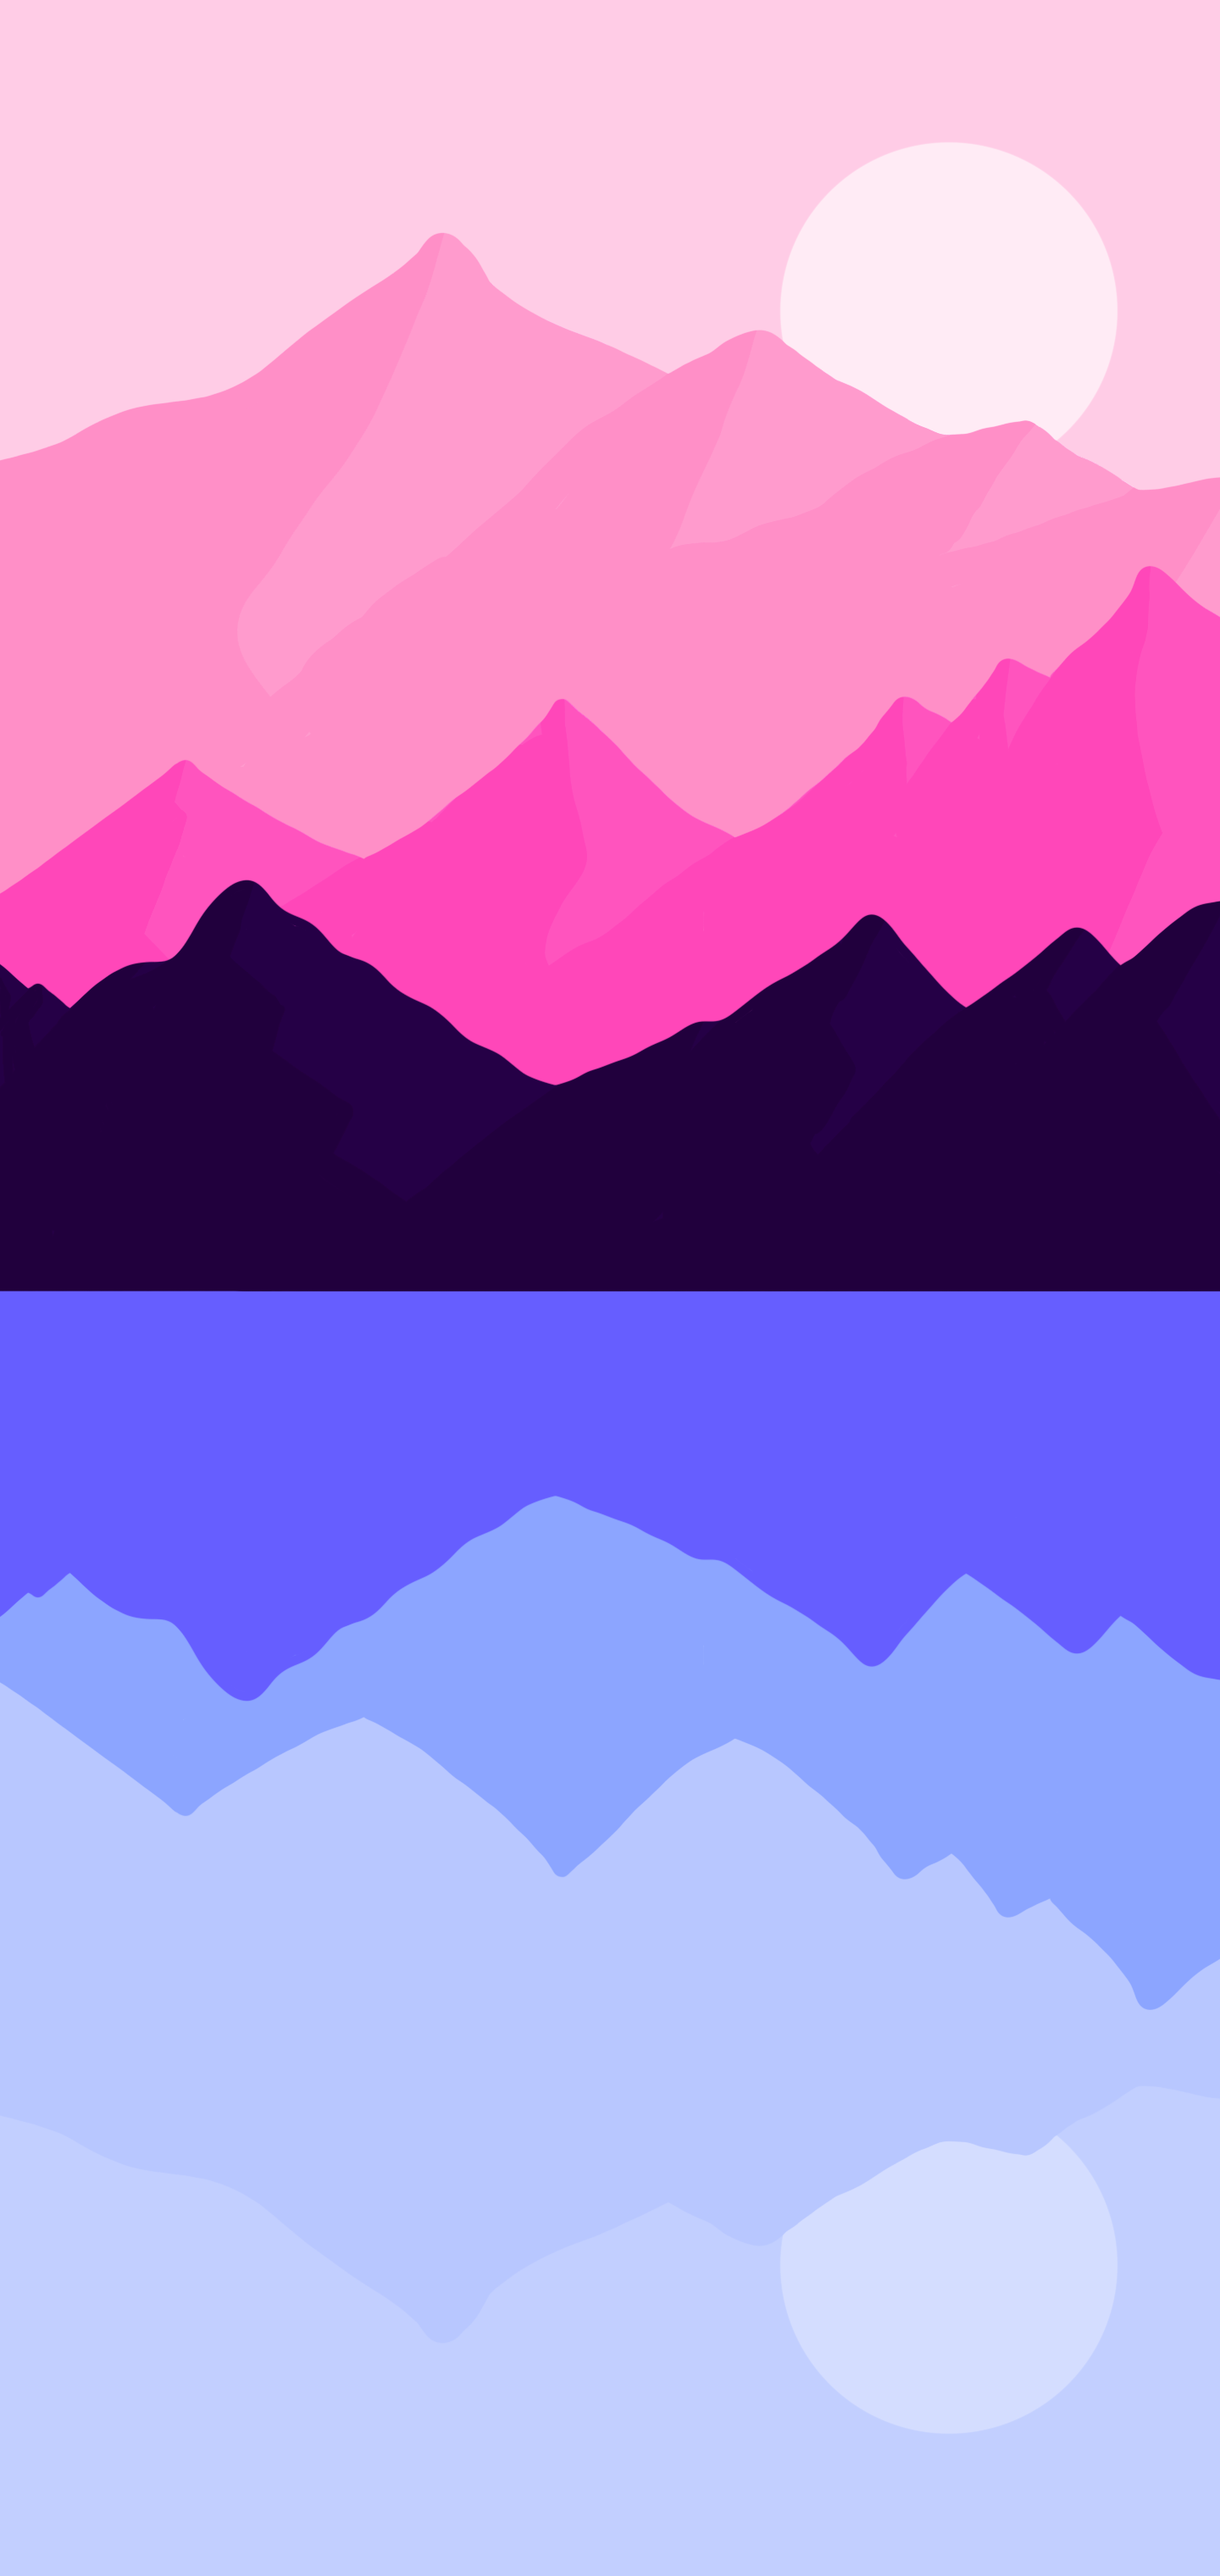 I made a landscape wallpaper using the Omni colors! this is the second Omni wallpaper I make! What should I do next?